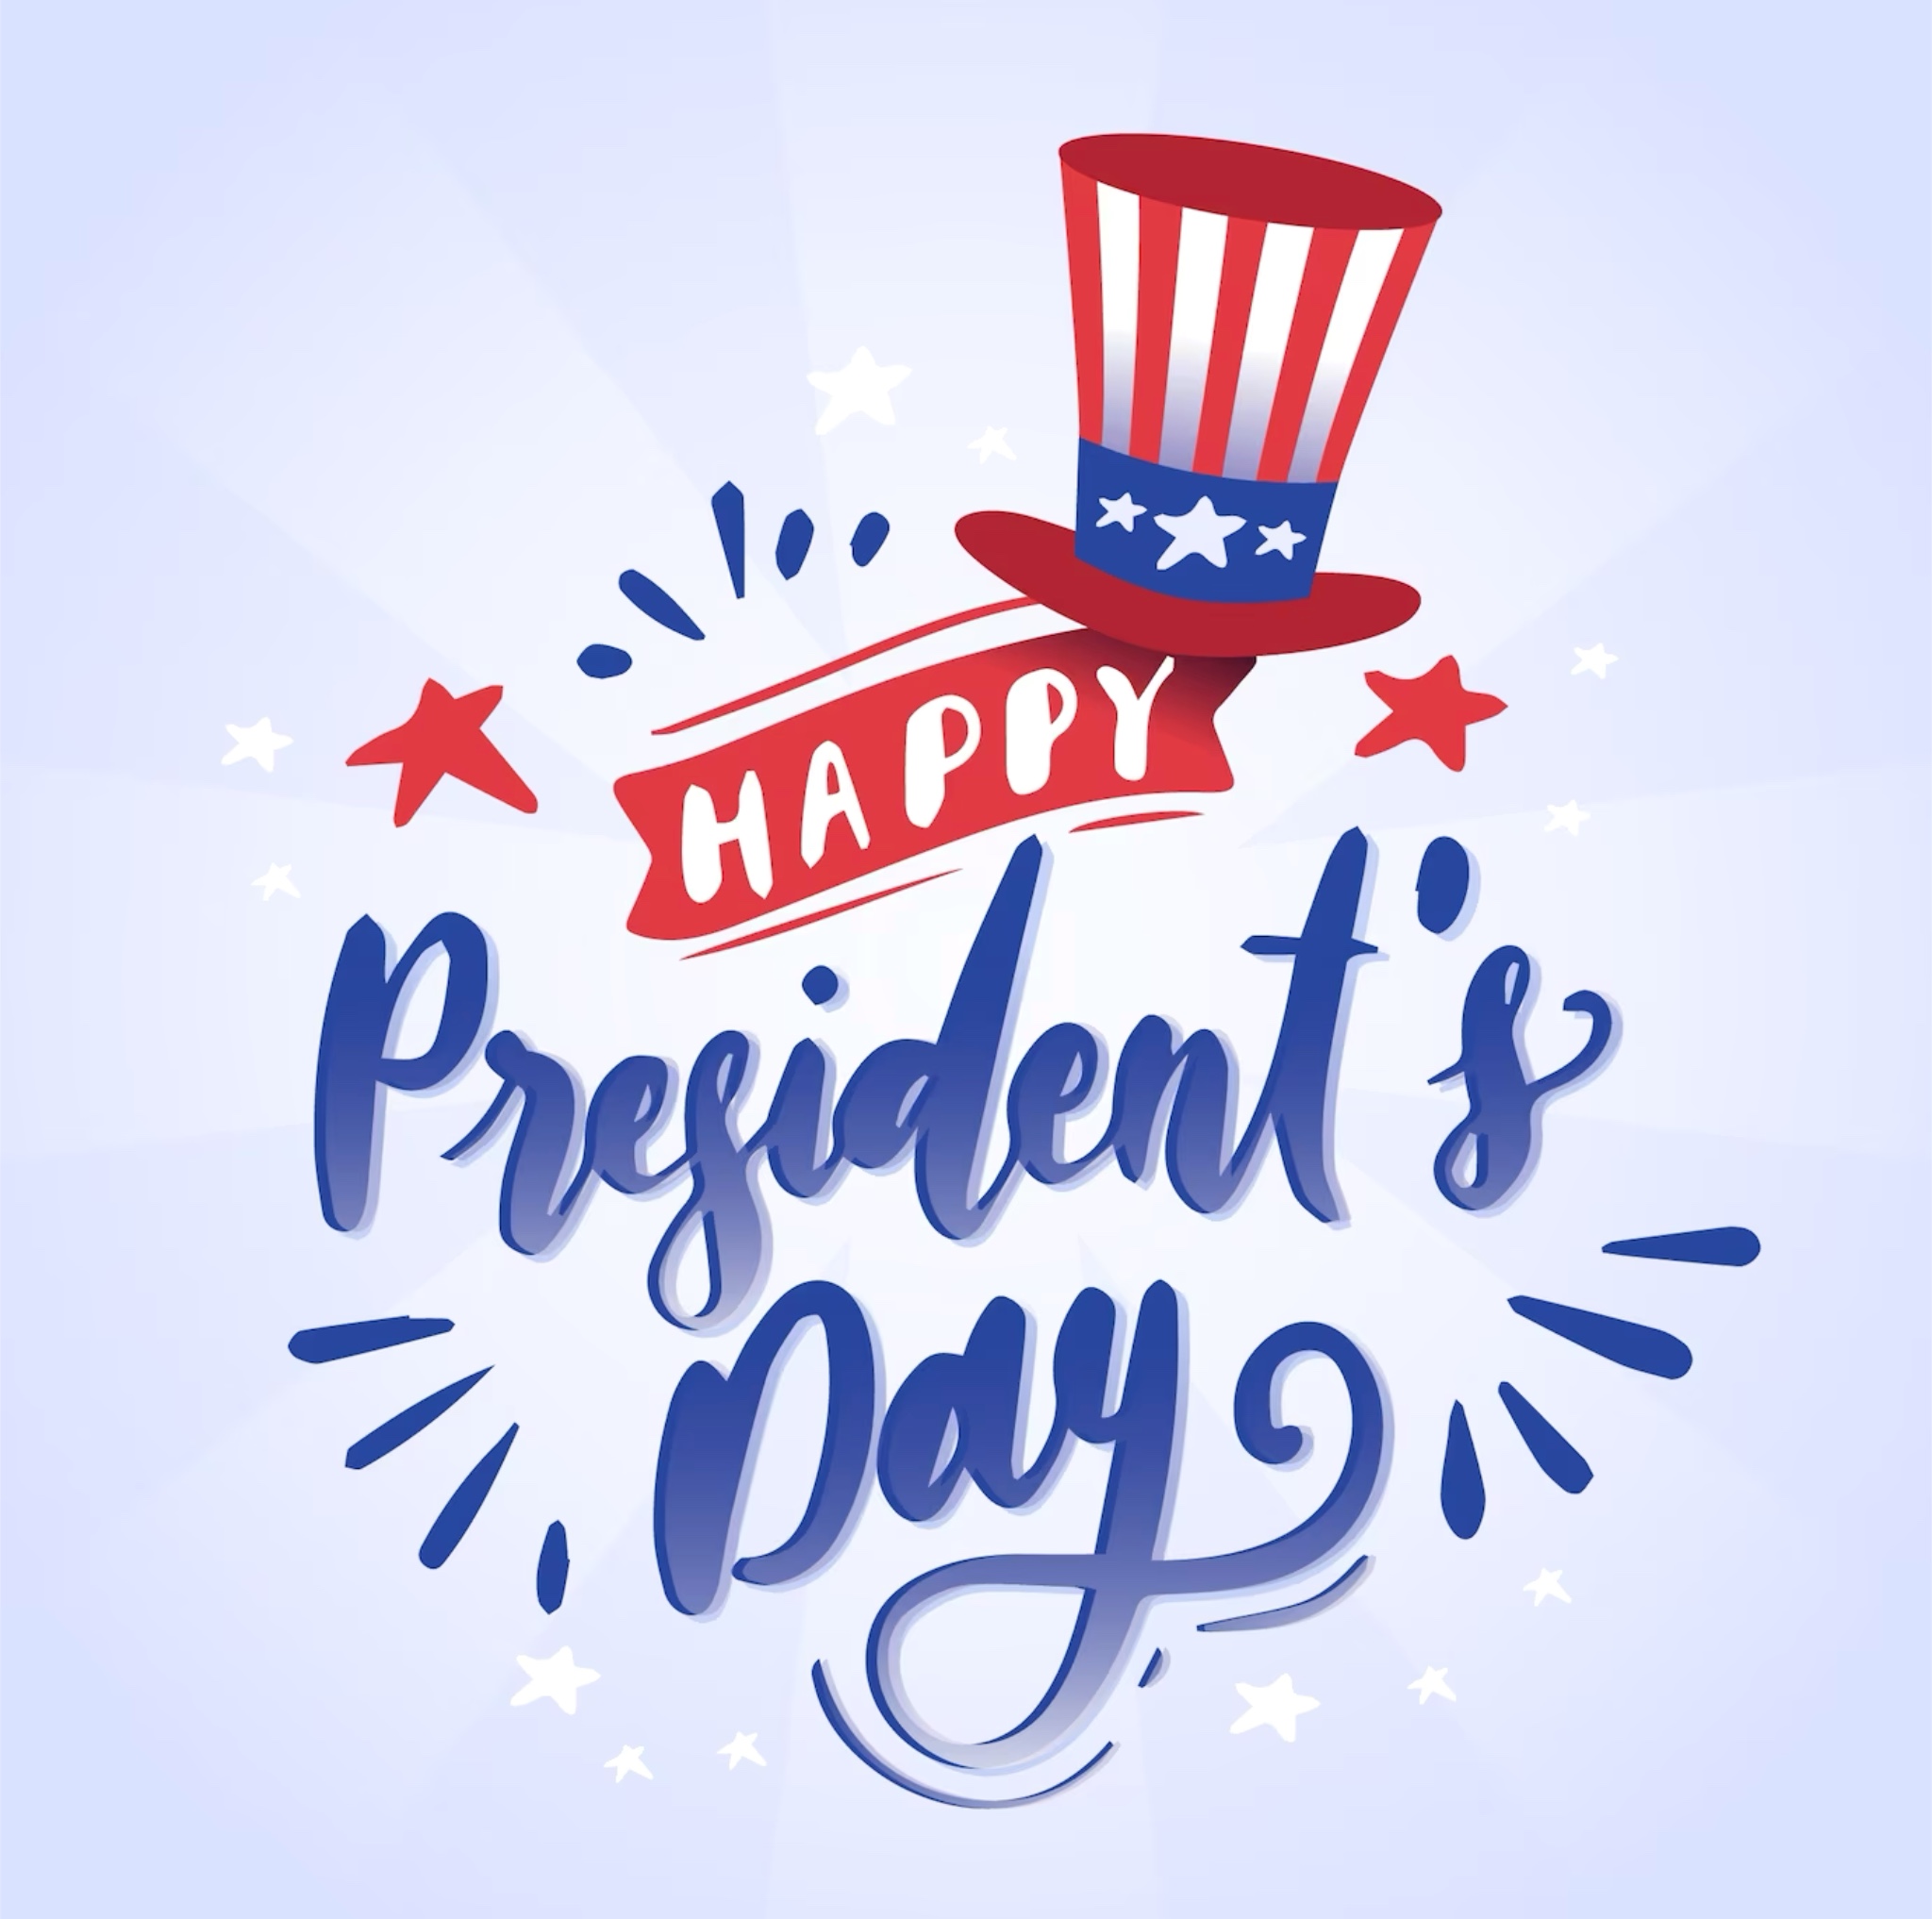 Read more about SFCC to close Feb. 20 for Presidents Day